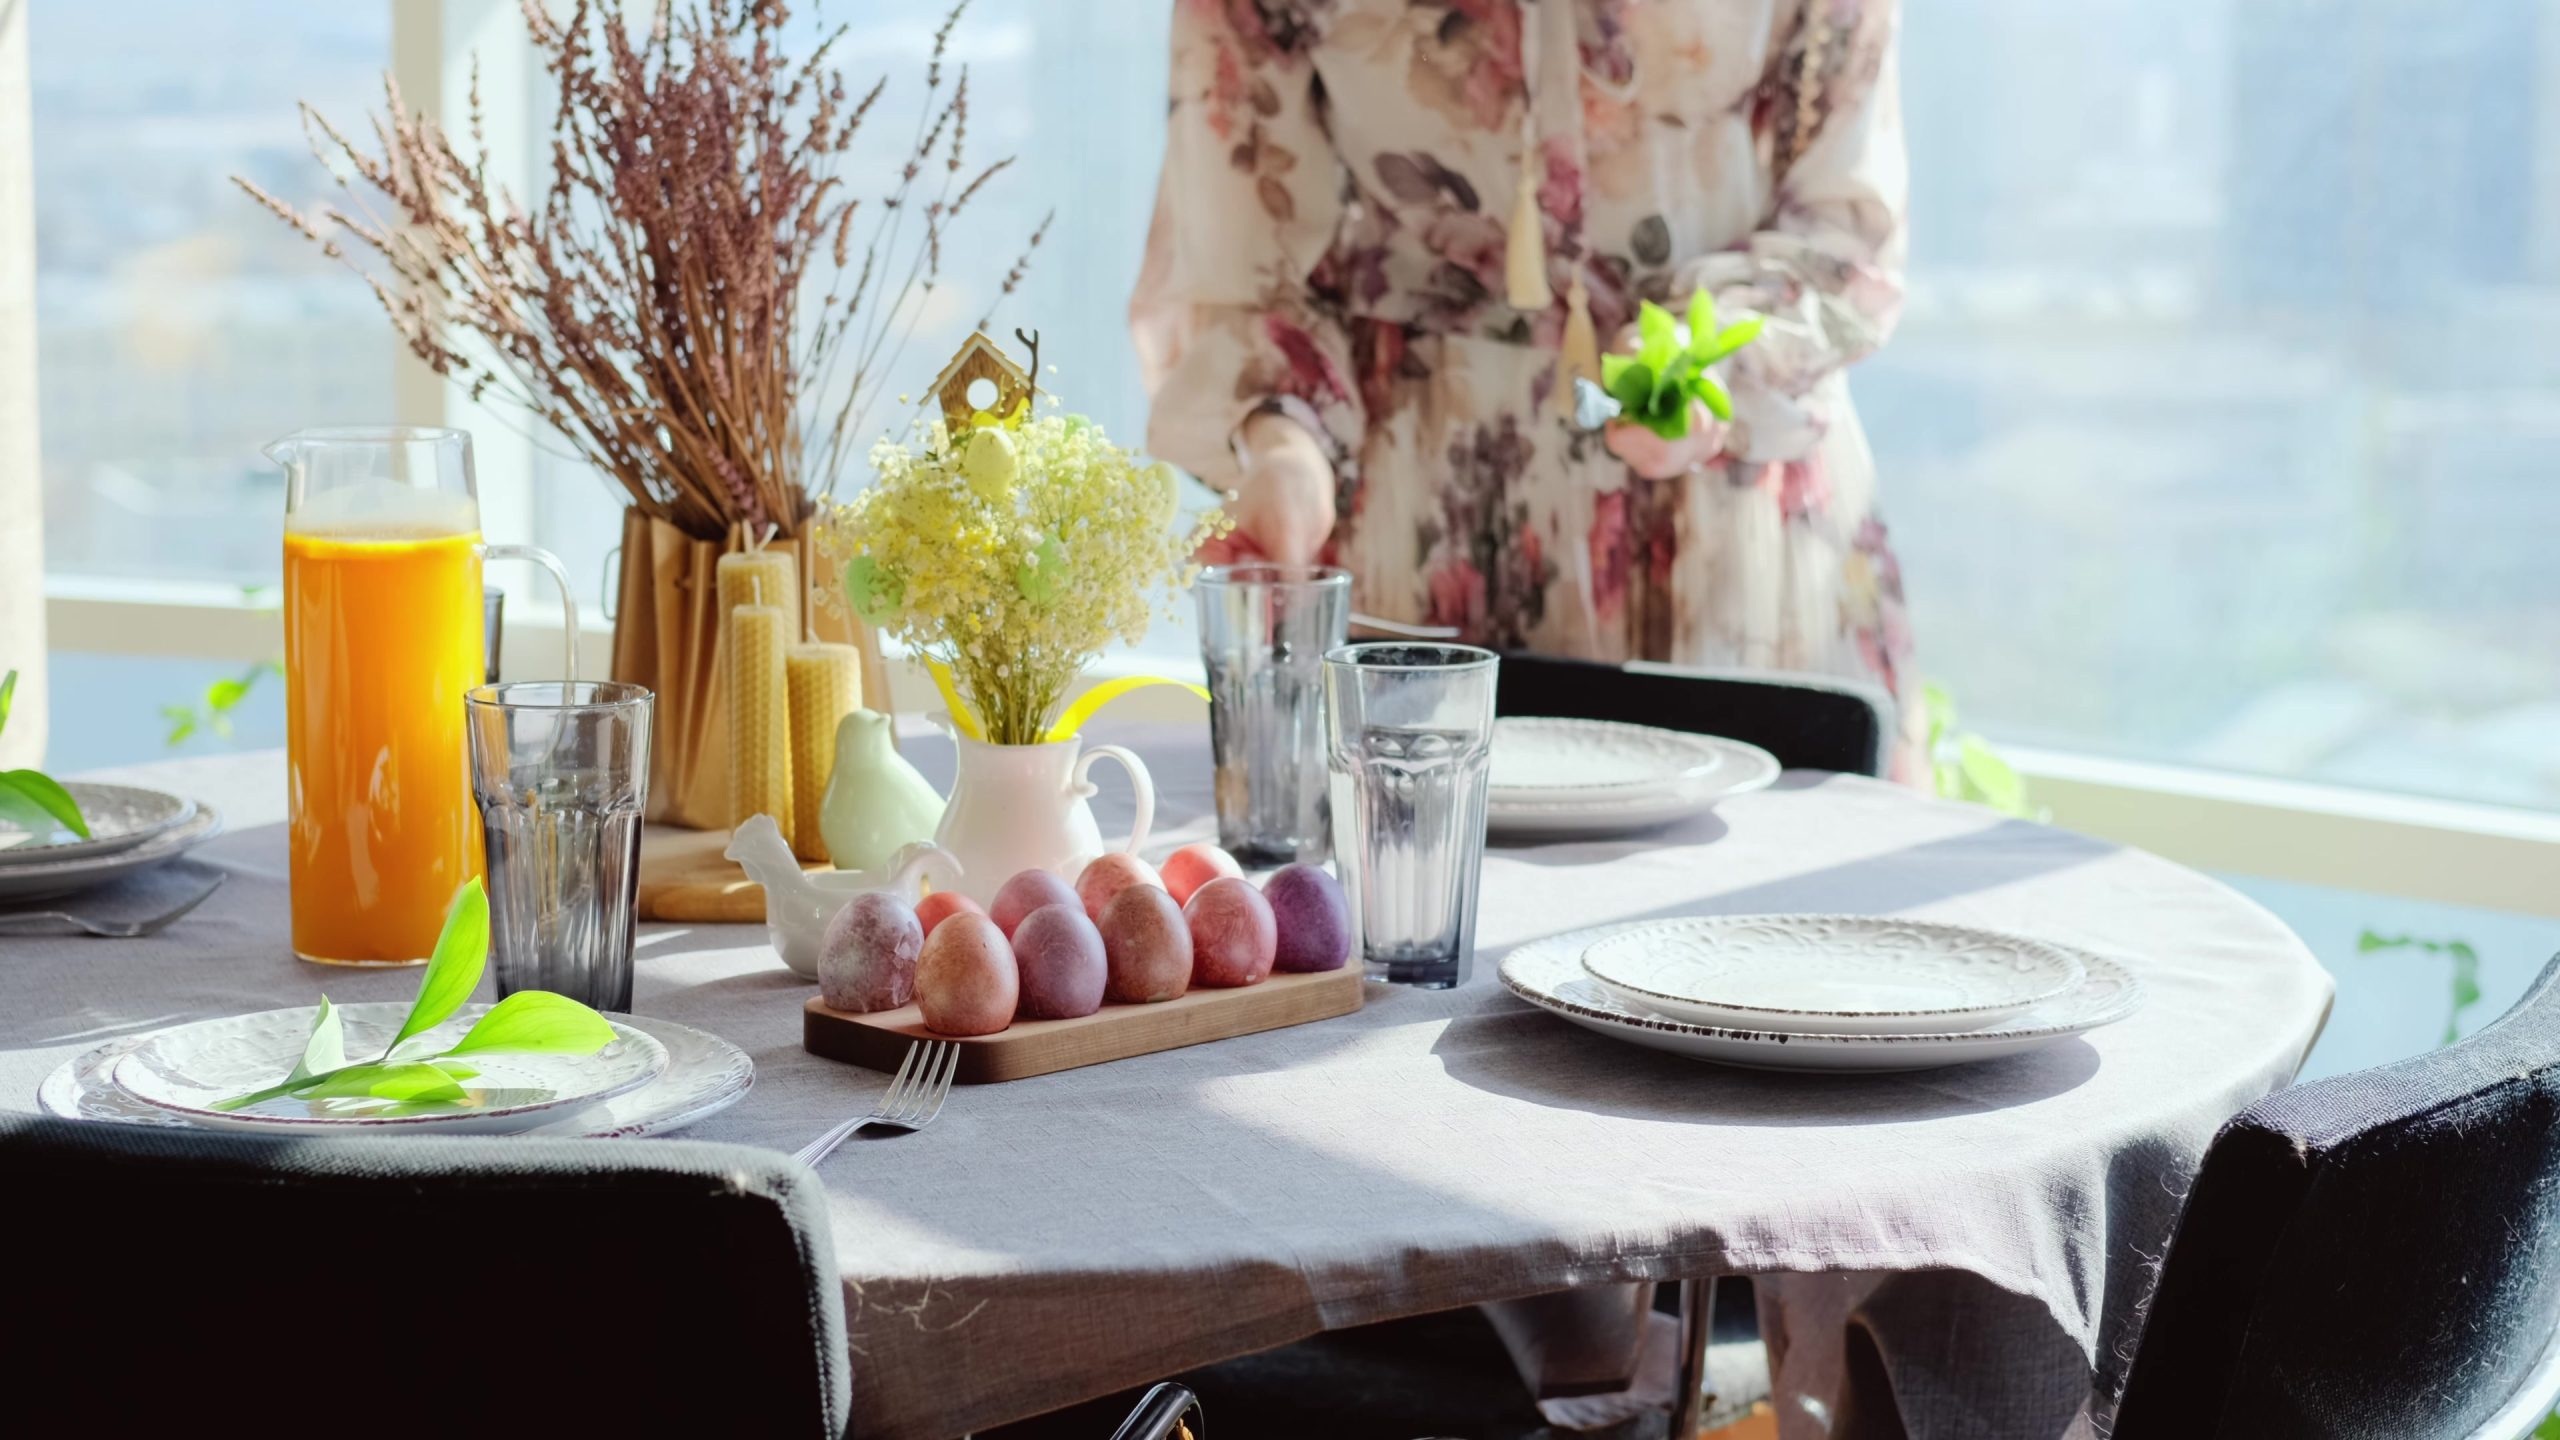 A woman in a smart dress serves a festive Easter table